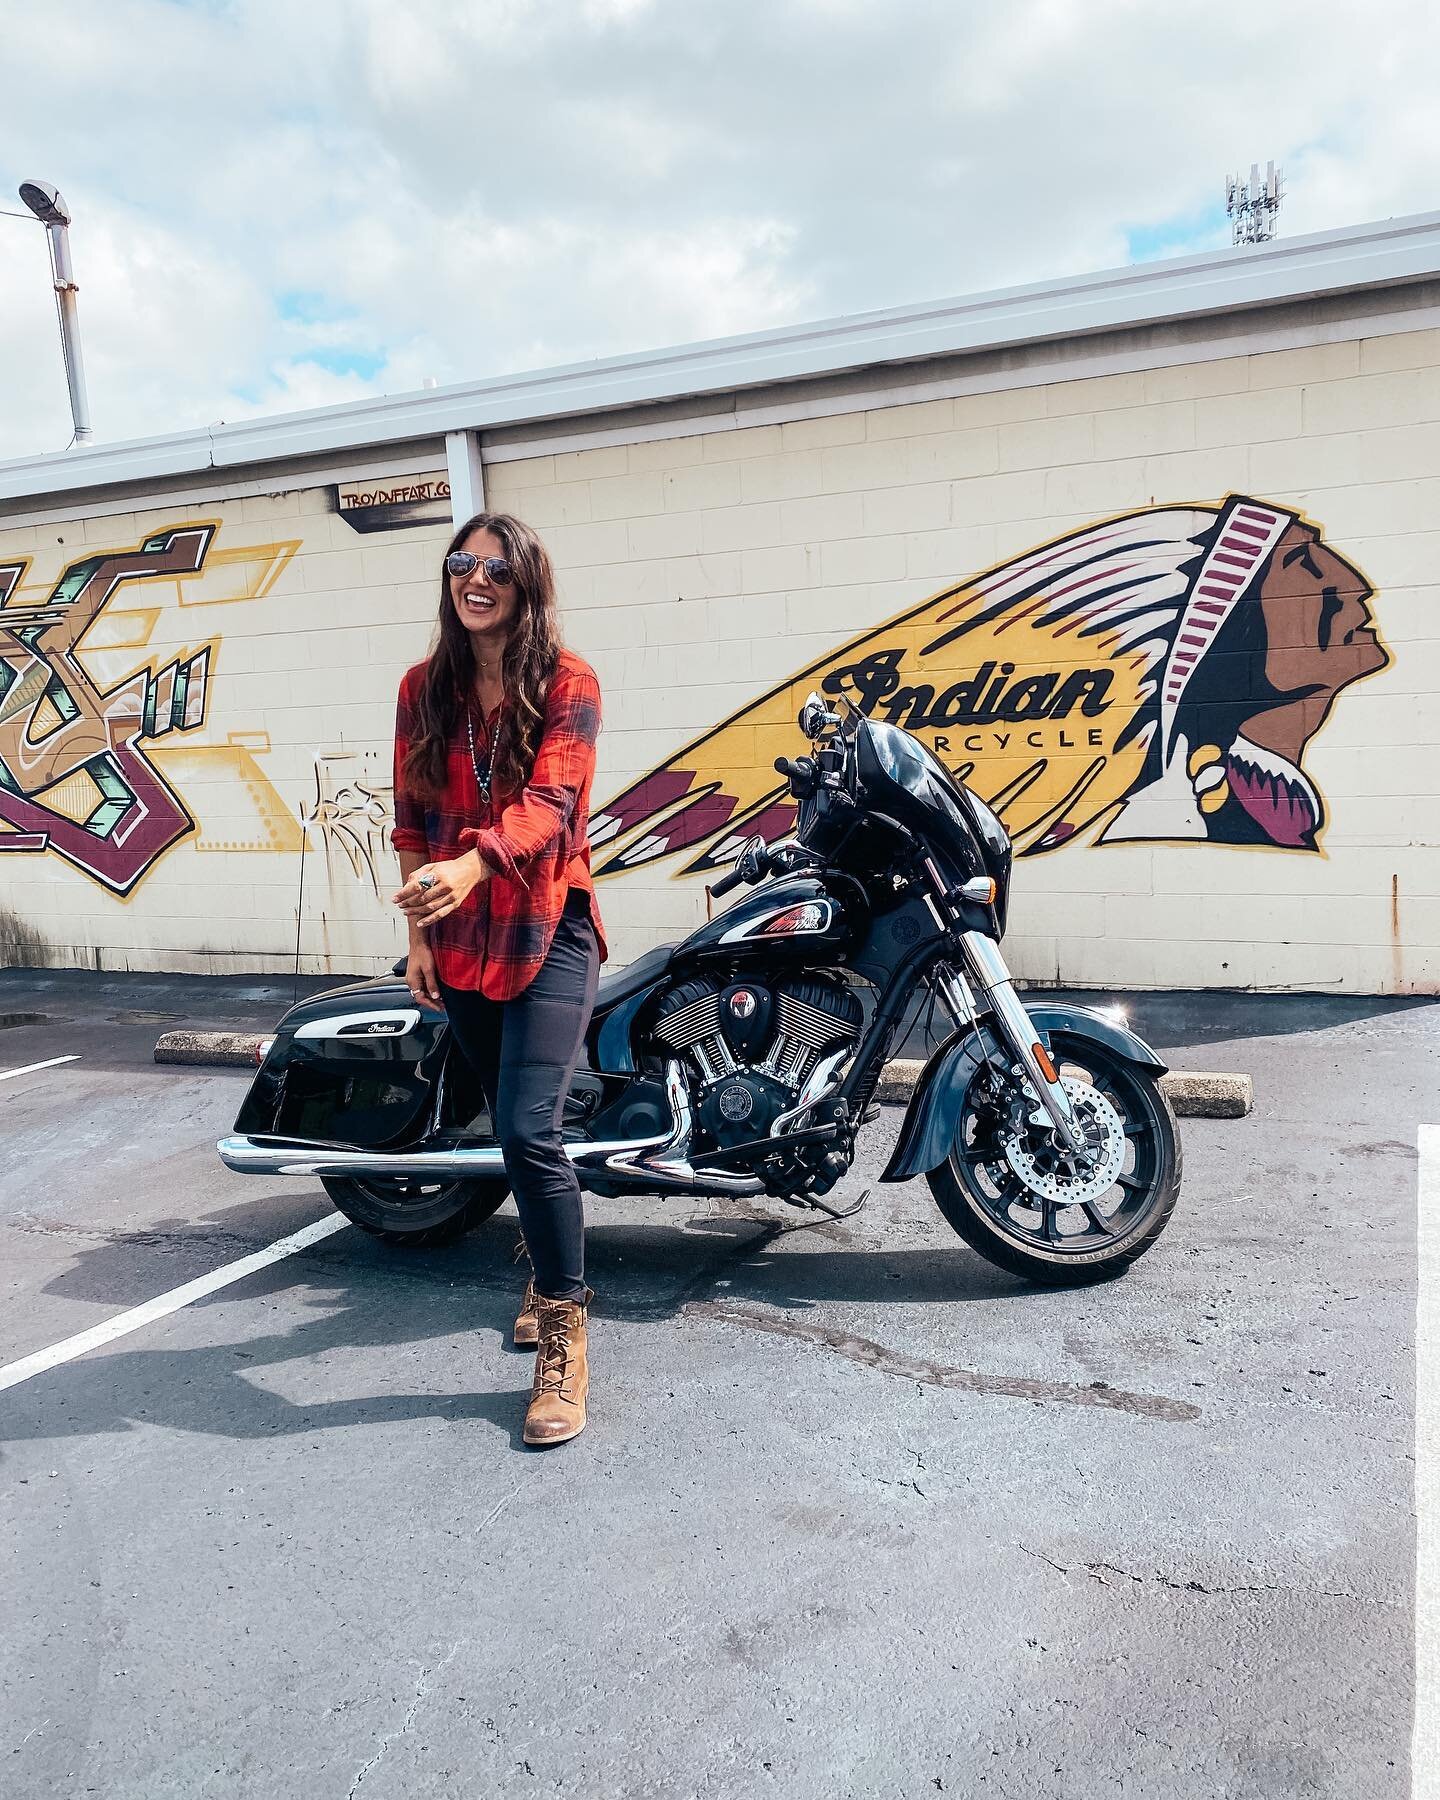 On Saturday May 7th, folks from all over the world will be celebrating International Female Ride Day and I want to invite you to come join us on this special day❤️

@ridewild.co is hosting our first ever WANDXR retreat at the legendary @wanderinn wit